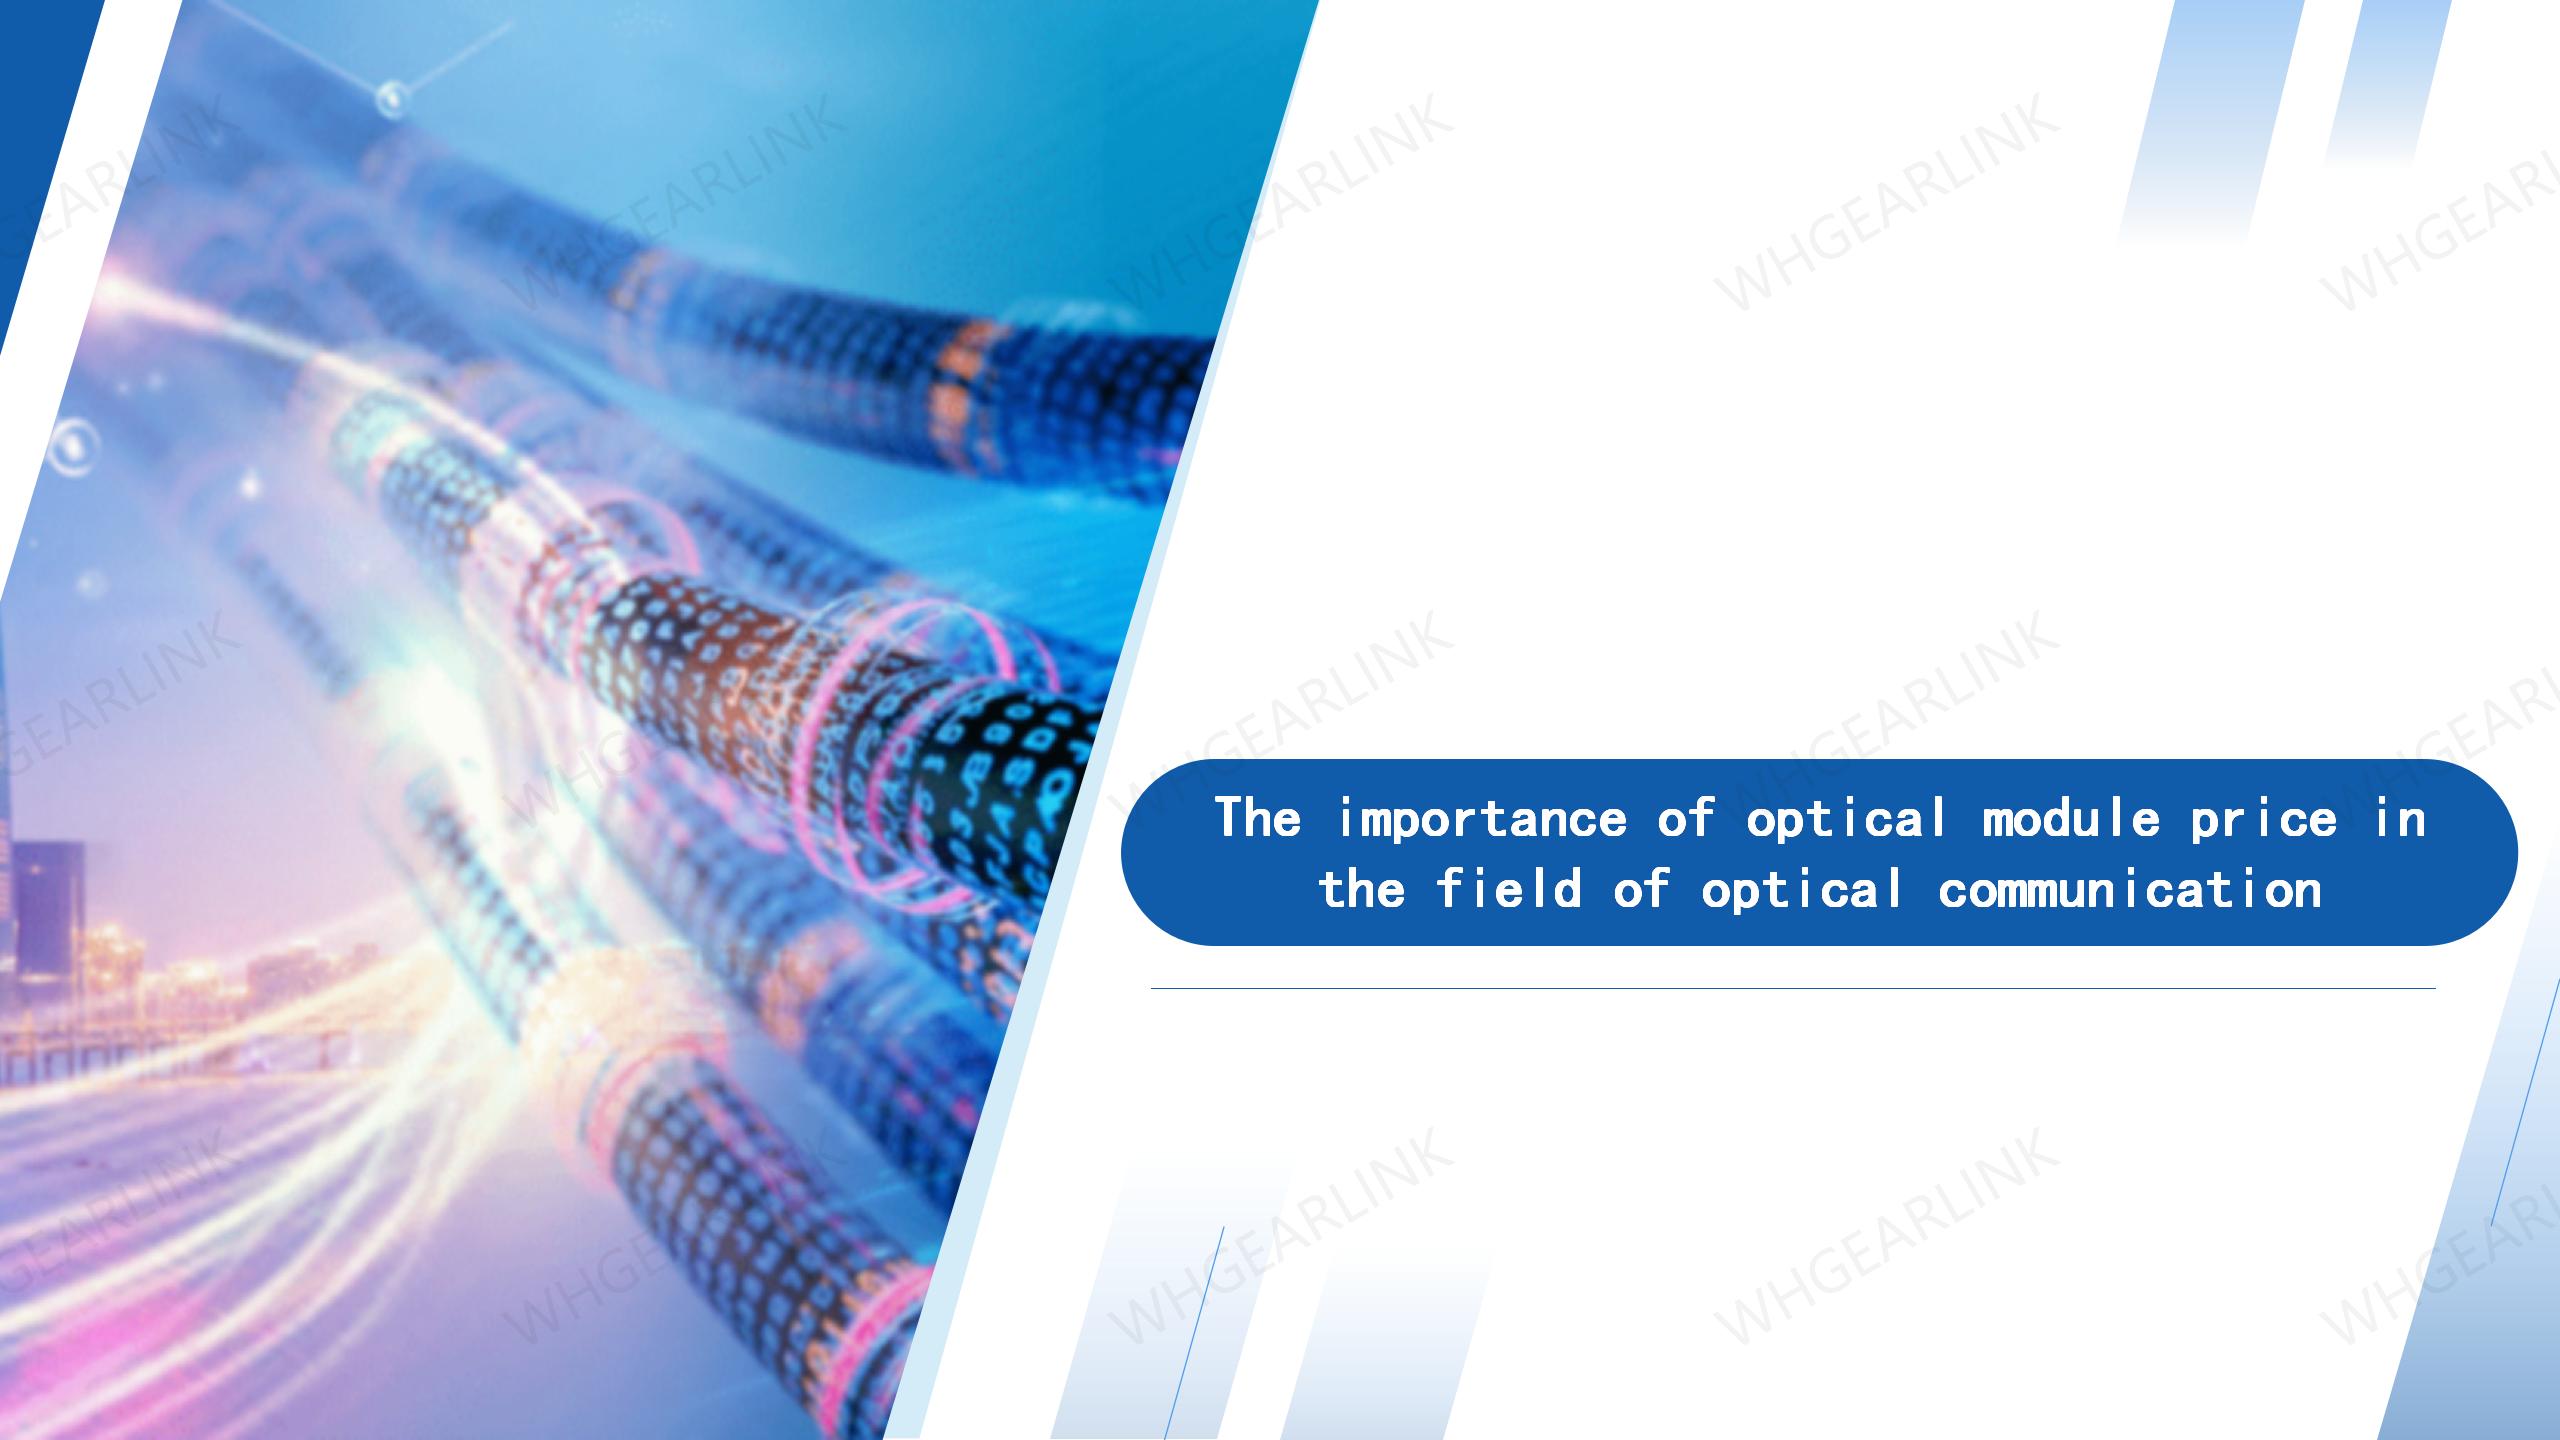 The importance of optical module price in the field of optical communication